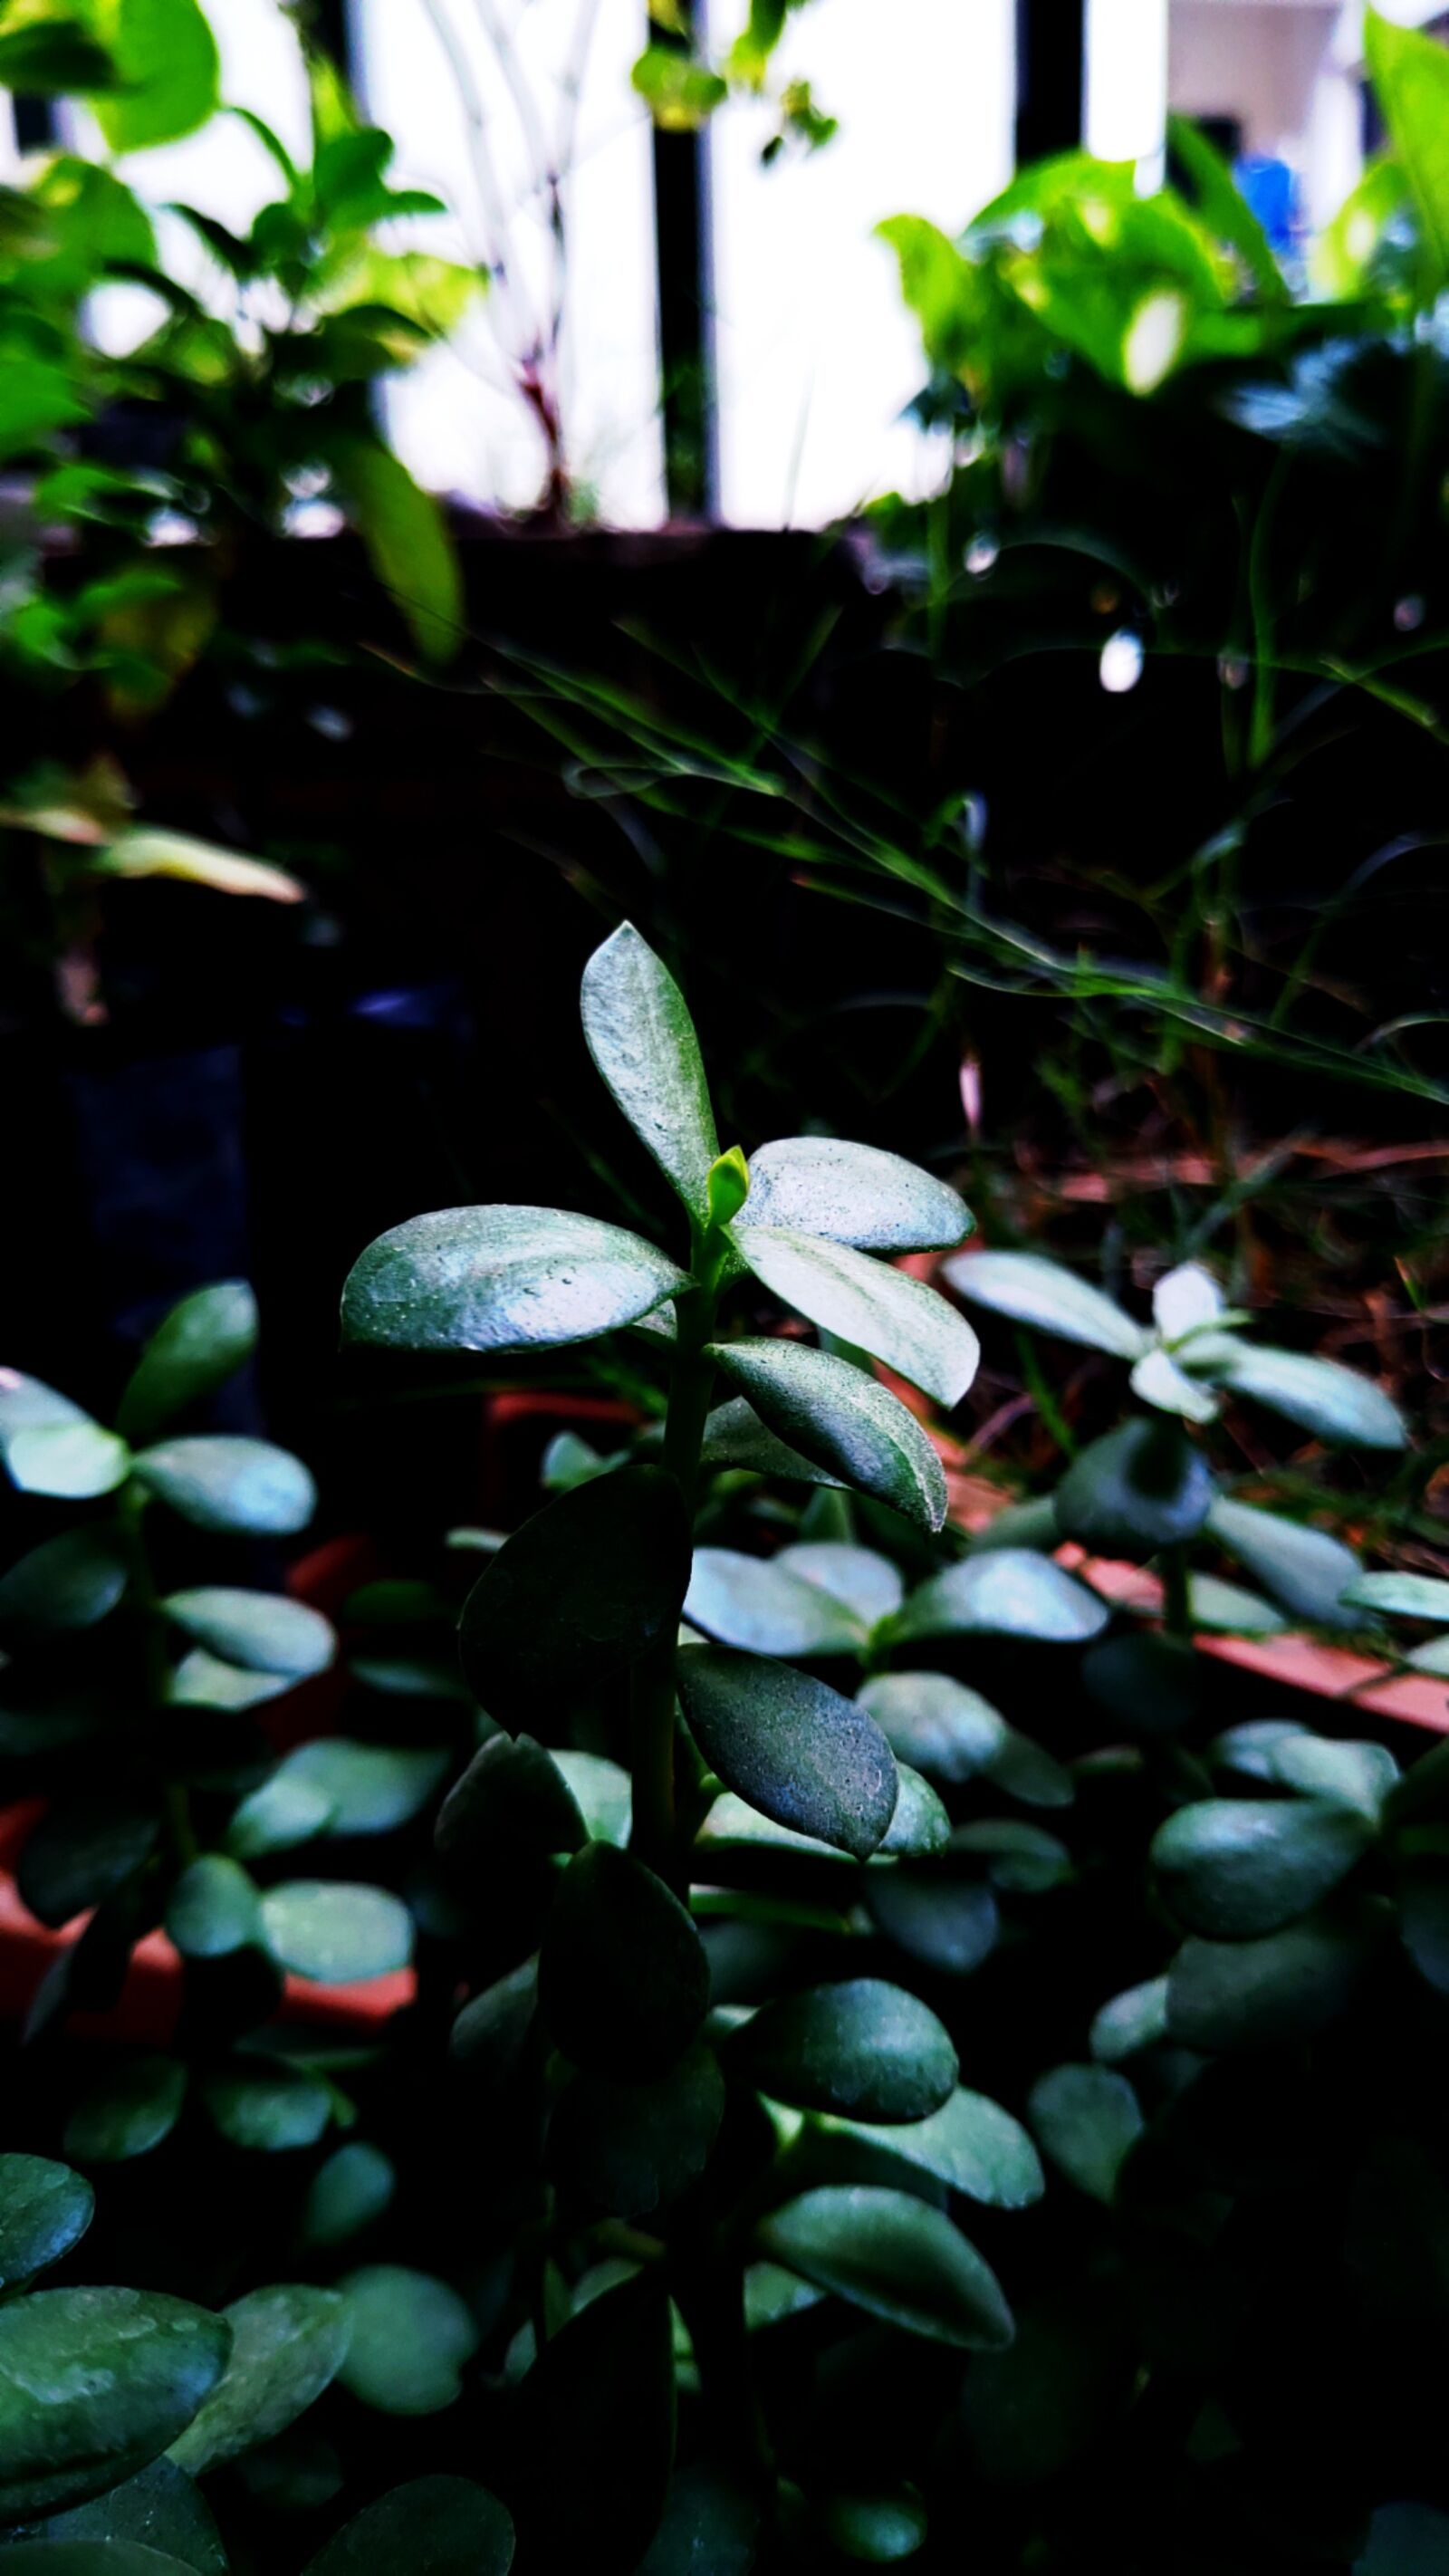 ASUS ZenFone 5Z (ZS620KL) (WW) / 5Z (ZS621KL) (IN) sample photo. Nature, greenplants, greenery greenwallpapers photography